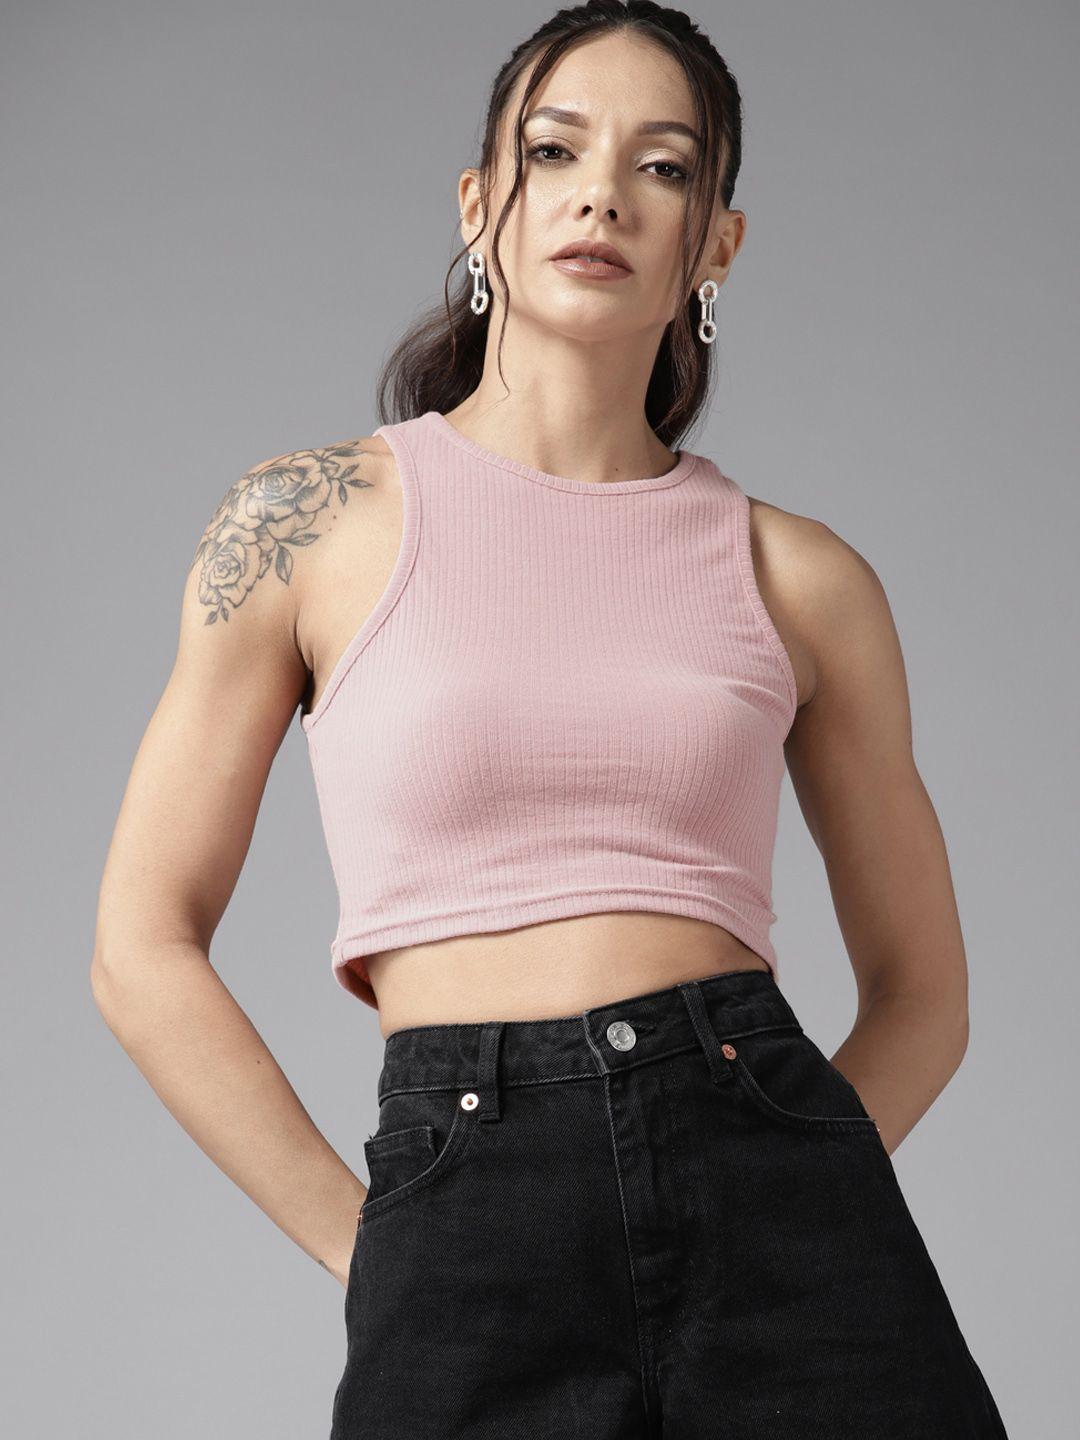 the roadster lifestyle co. sleeveless ribbed fitted crop top